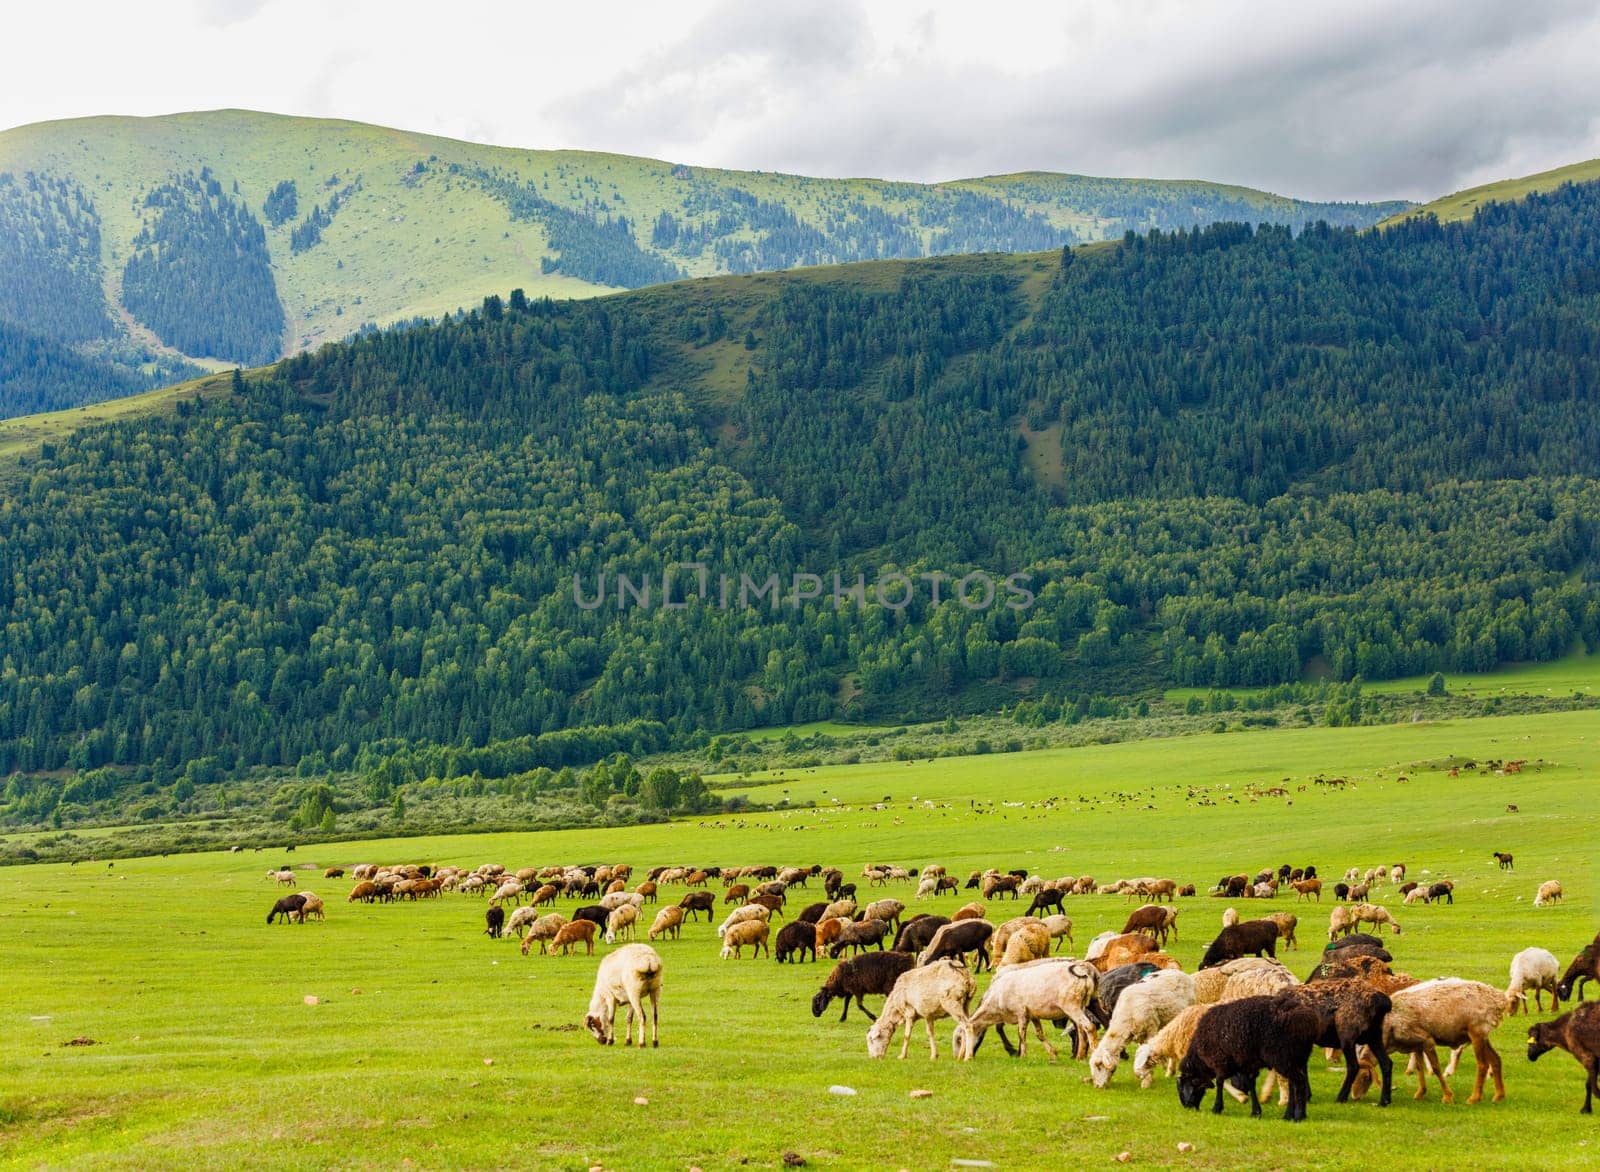 A flock of sheep grazes in a grassland gorge with mountains in the backdrop by z1b